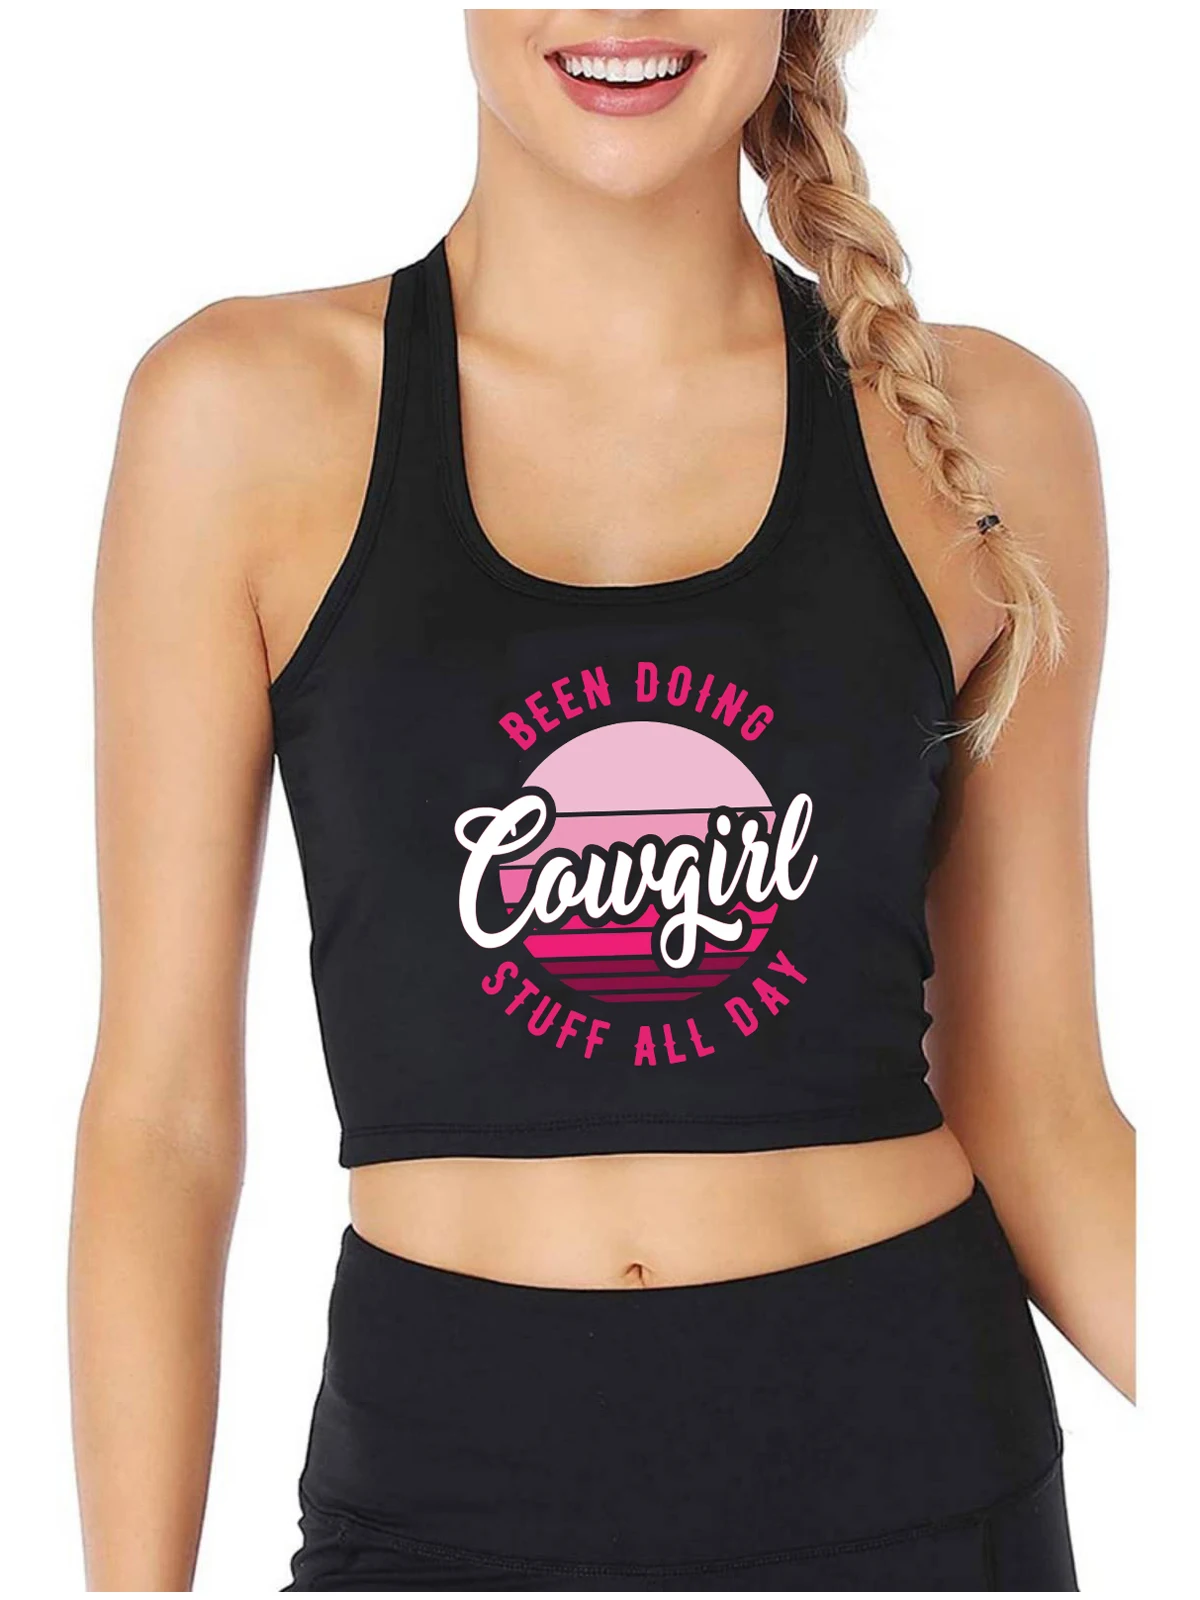 

Been Doing Cowgirl Stuff All Day Design Sexy Fit Crop Top Western Cowgirl Casual Personalized Tank Tops Cotton Sports Camisole